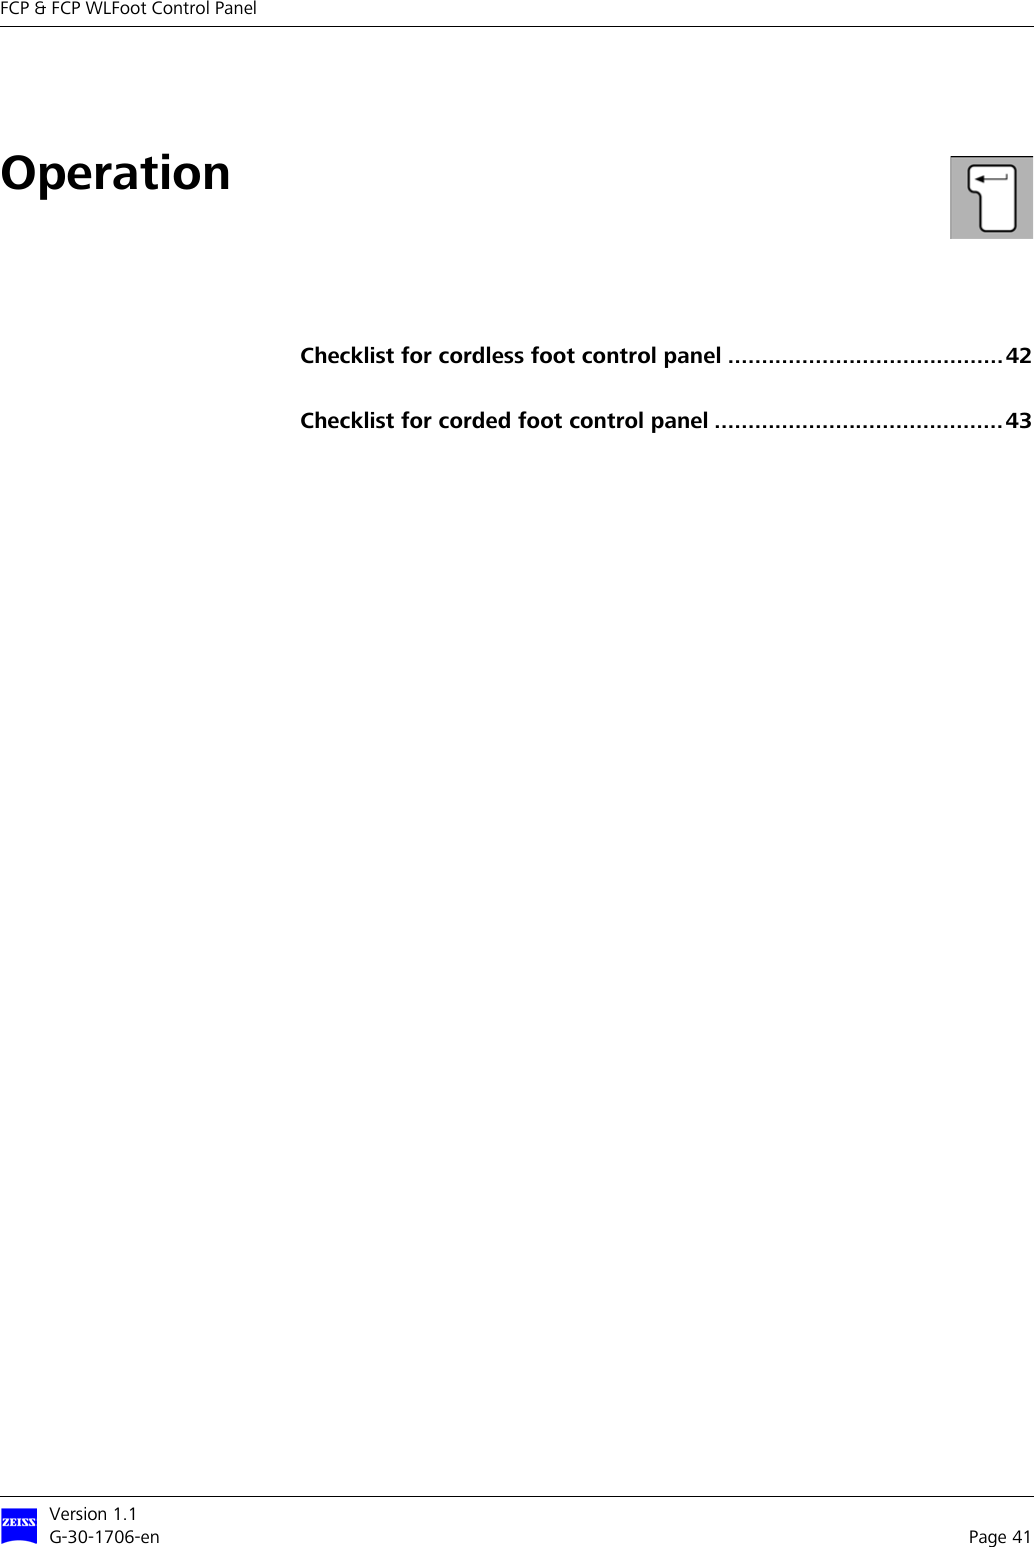 Version 1.1G-30-1706-en Page 41FCP &amp; FCP WLFoot Control PanelOperationChecklist for cordless foot control panel .........................................42Checklist for corded foot control panel ...........................................43